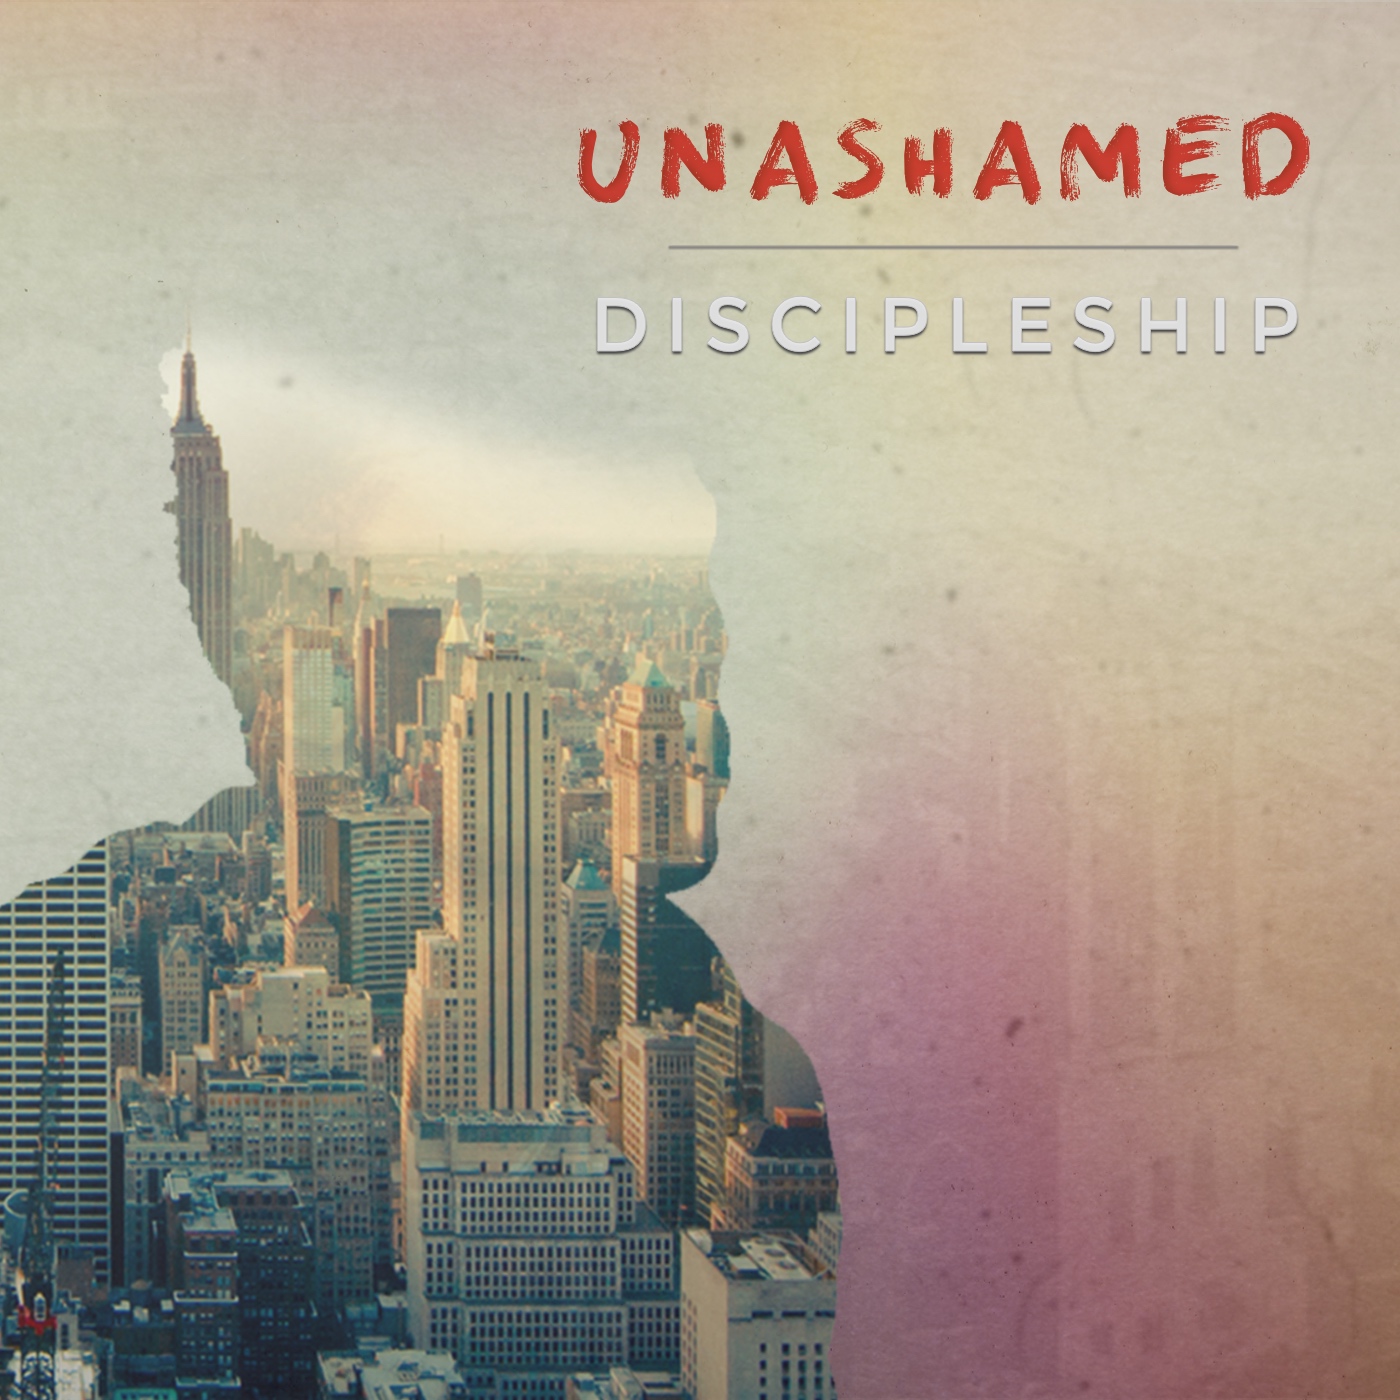 DISCIPLESHIP //5. The Cost of Discipleship -  A Disciple is One Who Knows the Cost